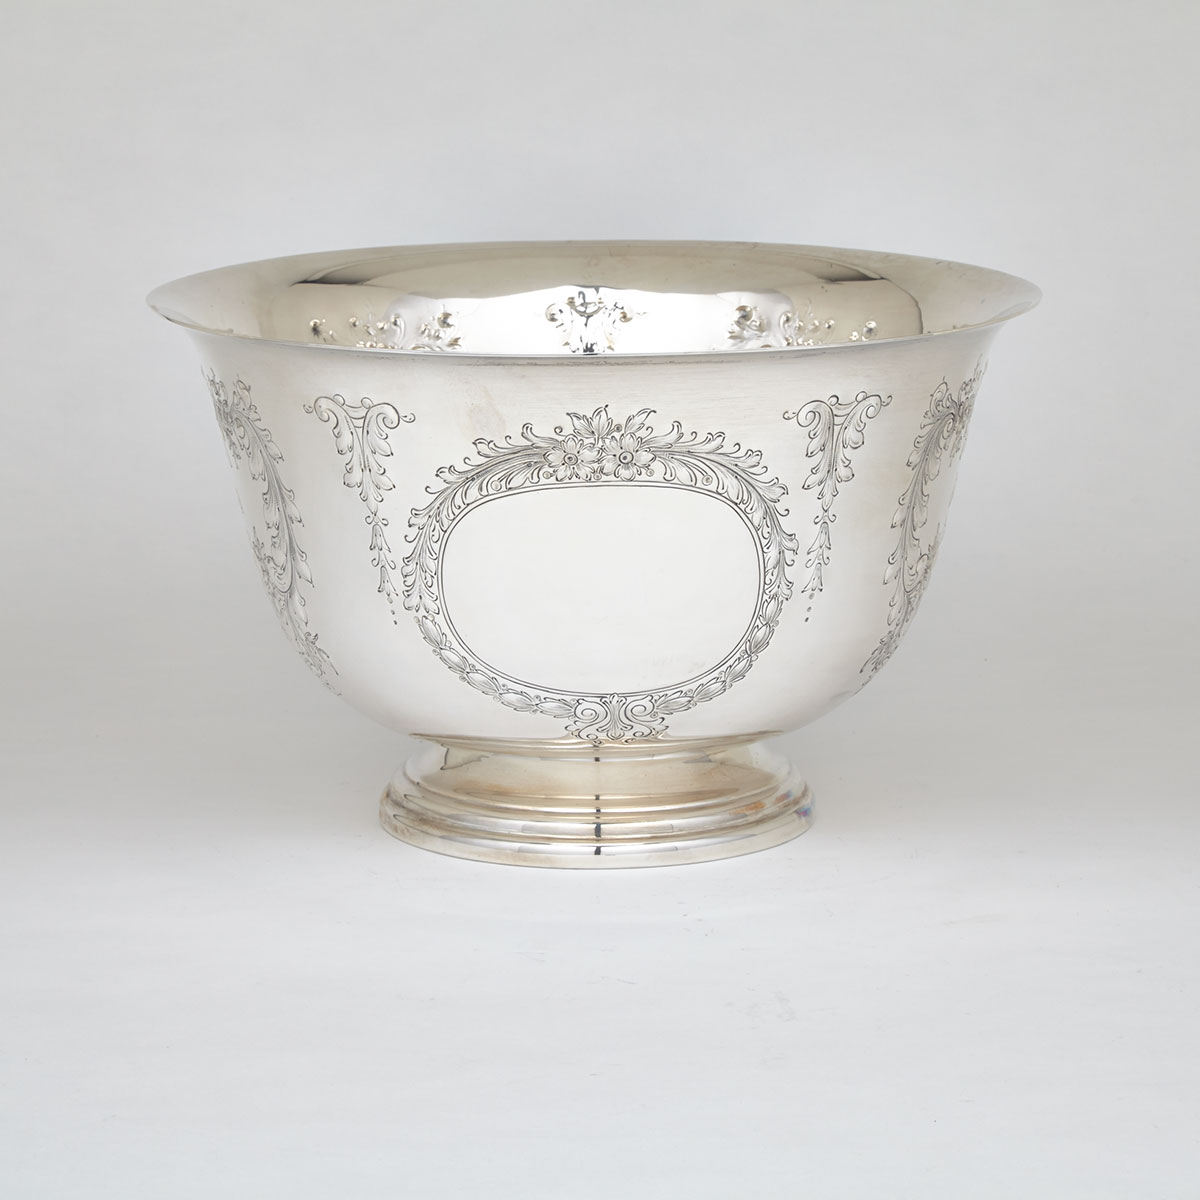 American Silver Large Punch Bowl, Manchester Silver Co., Providence, RI., 20th century